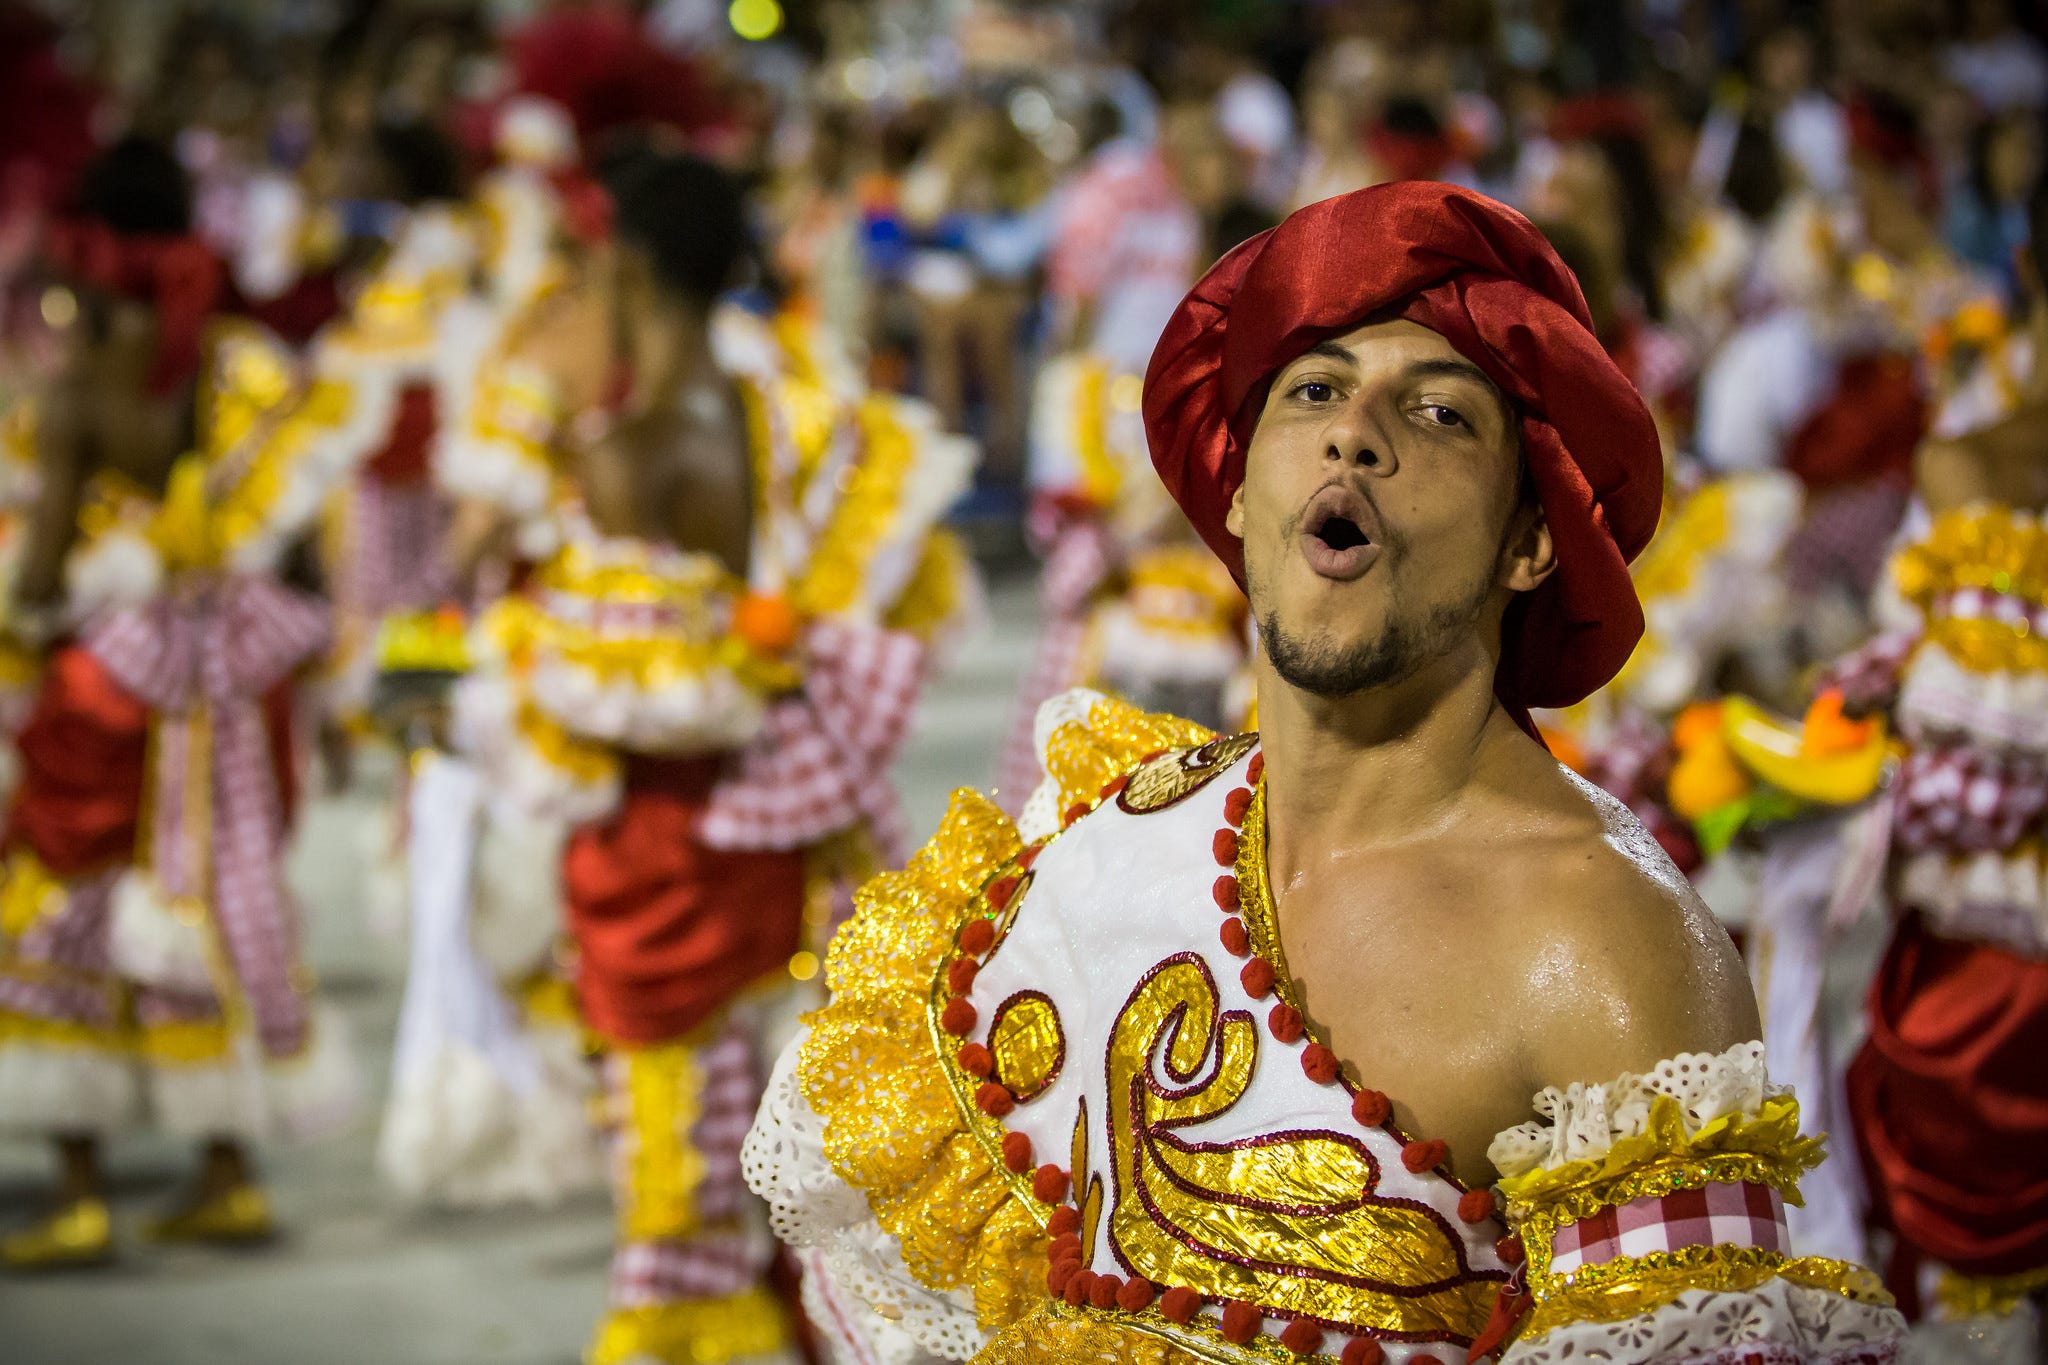 ALL DAY I DREAM OF RIO CARNAVAL